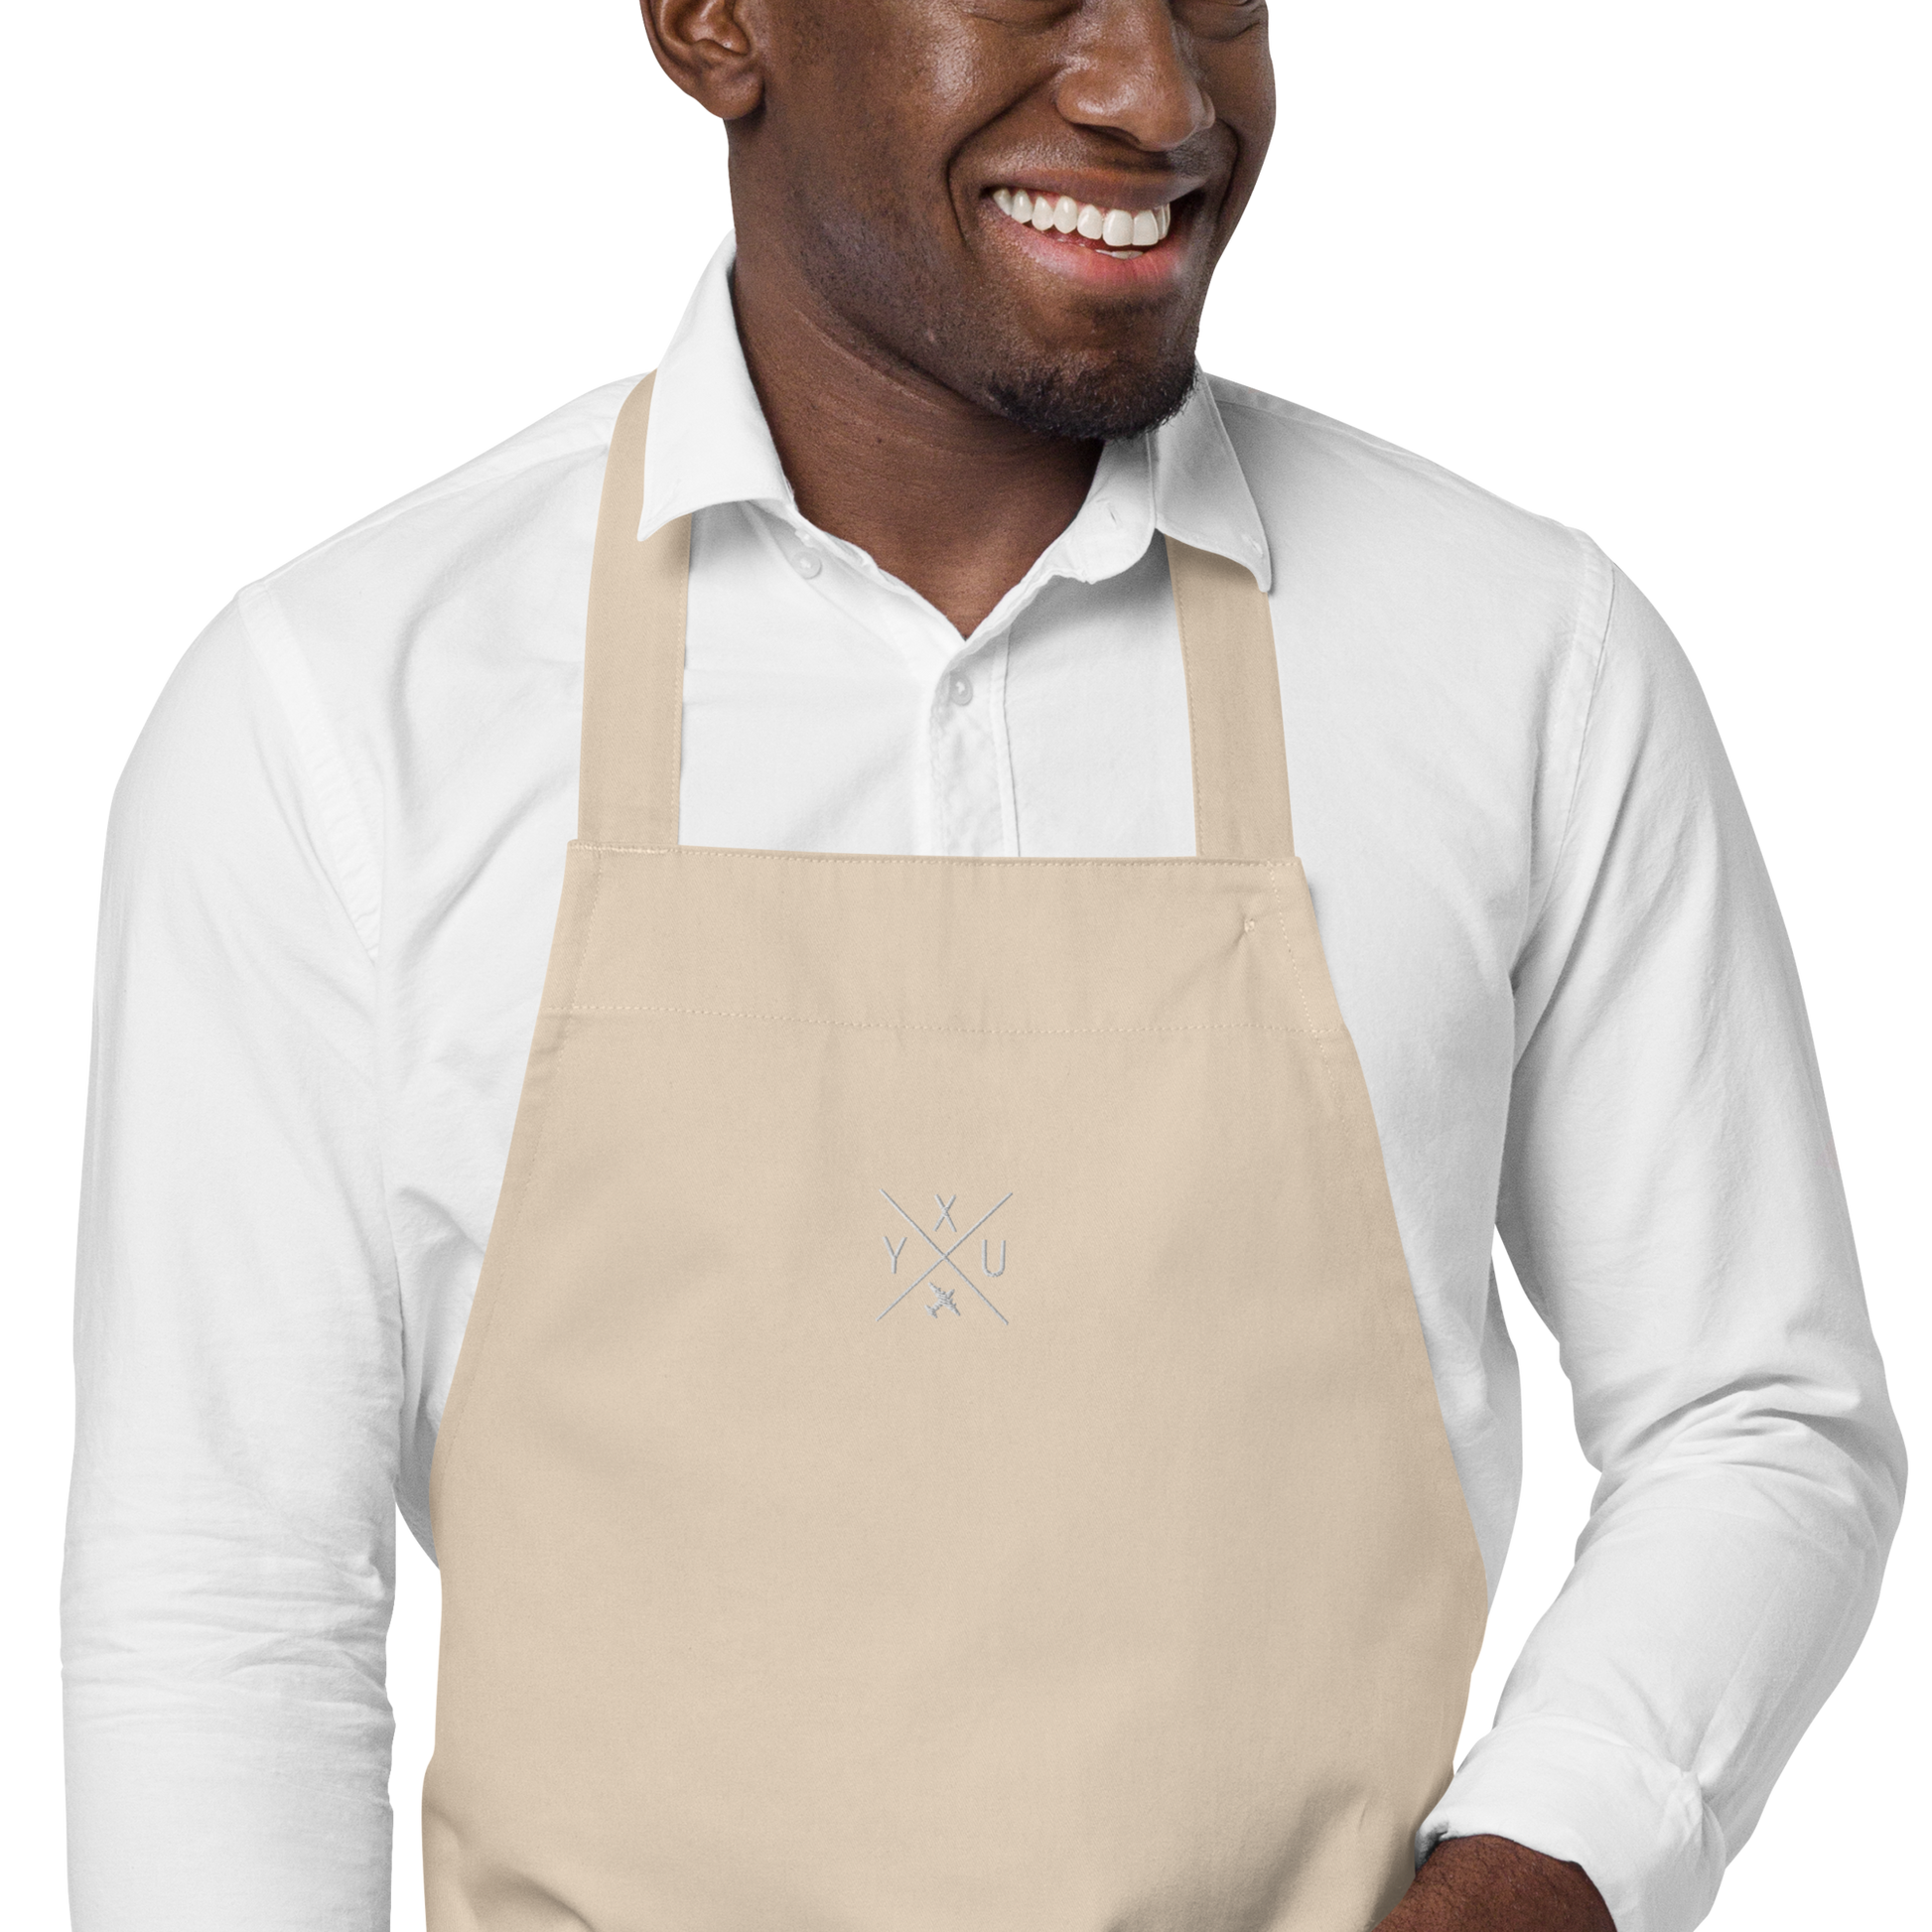 YHM Designs - YXU London Organic Cotton Apron - Crossed-X Design with Airport Code and Vintage Propliner - White Embroidery - Image 13